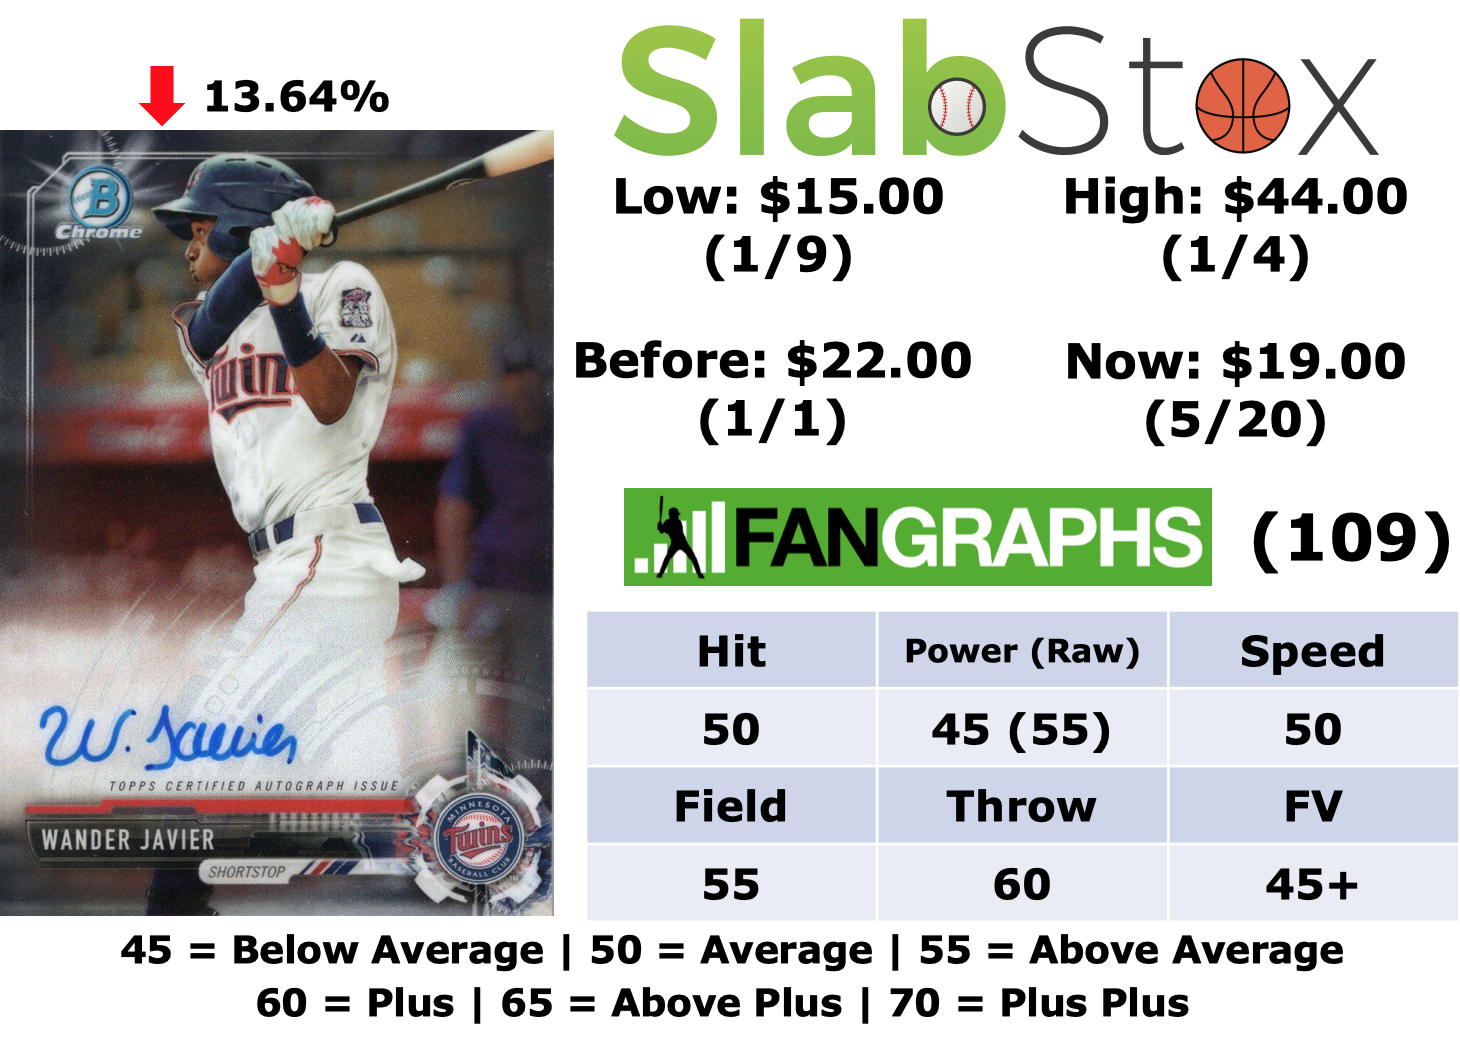 SlabStox infographic for Wander Javier sports trading card